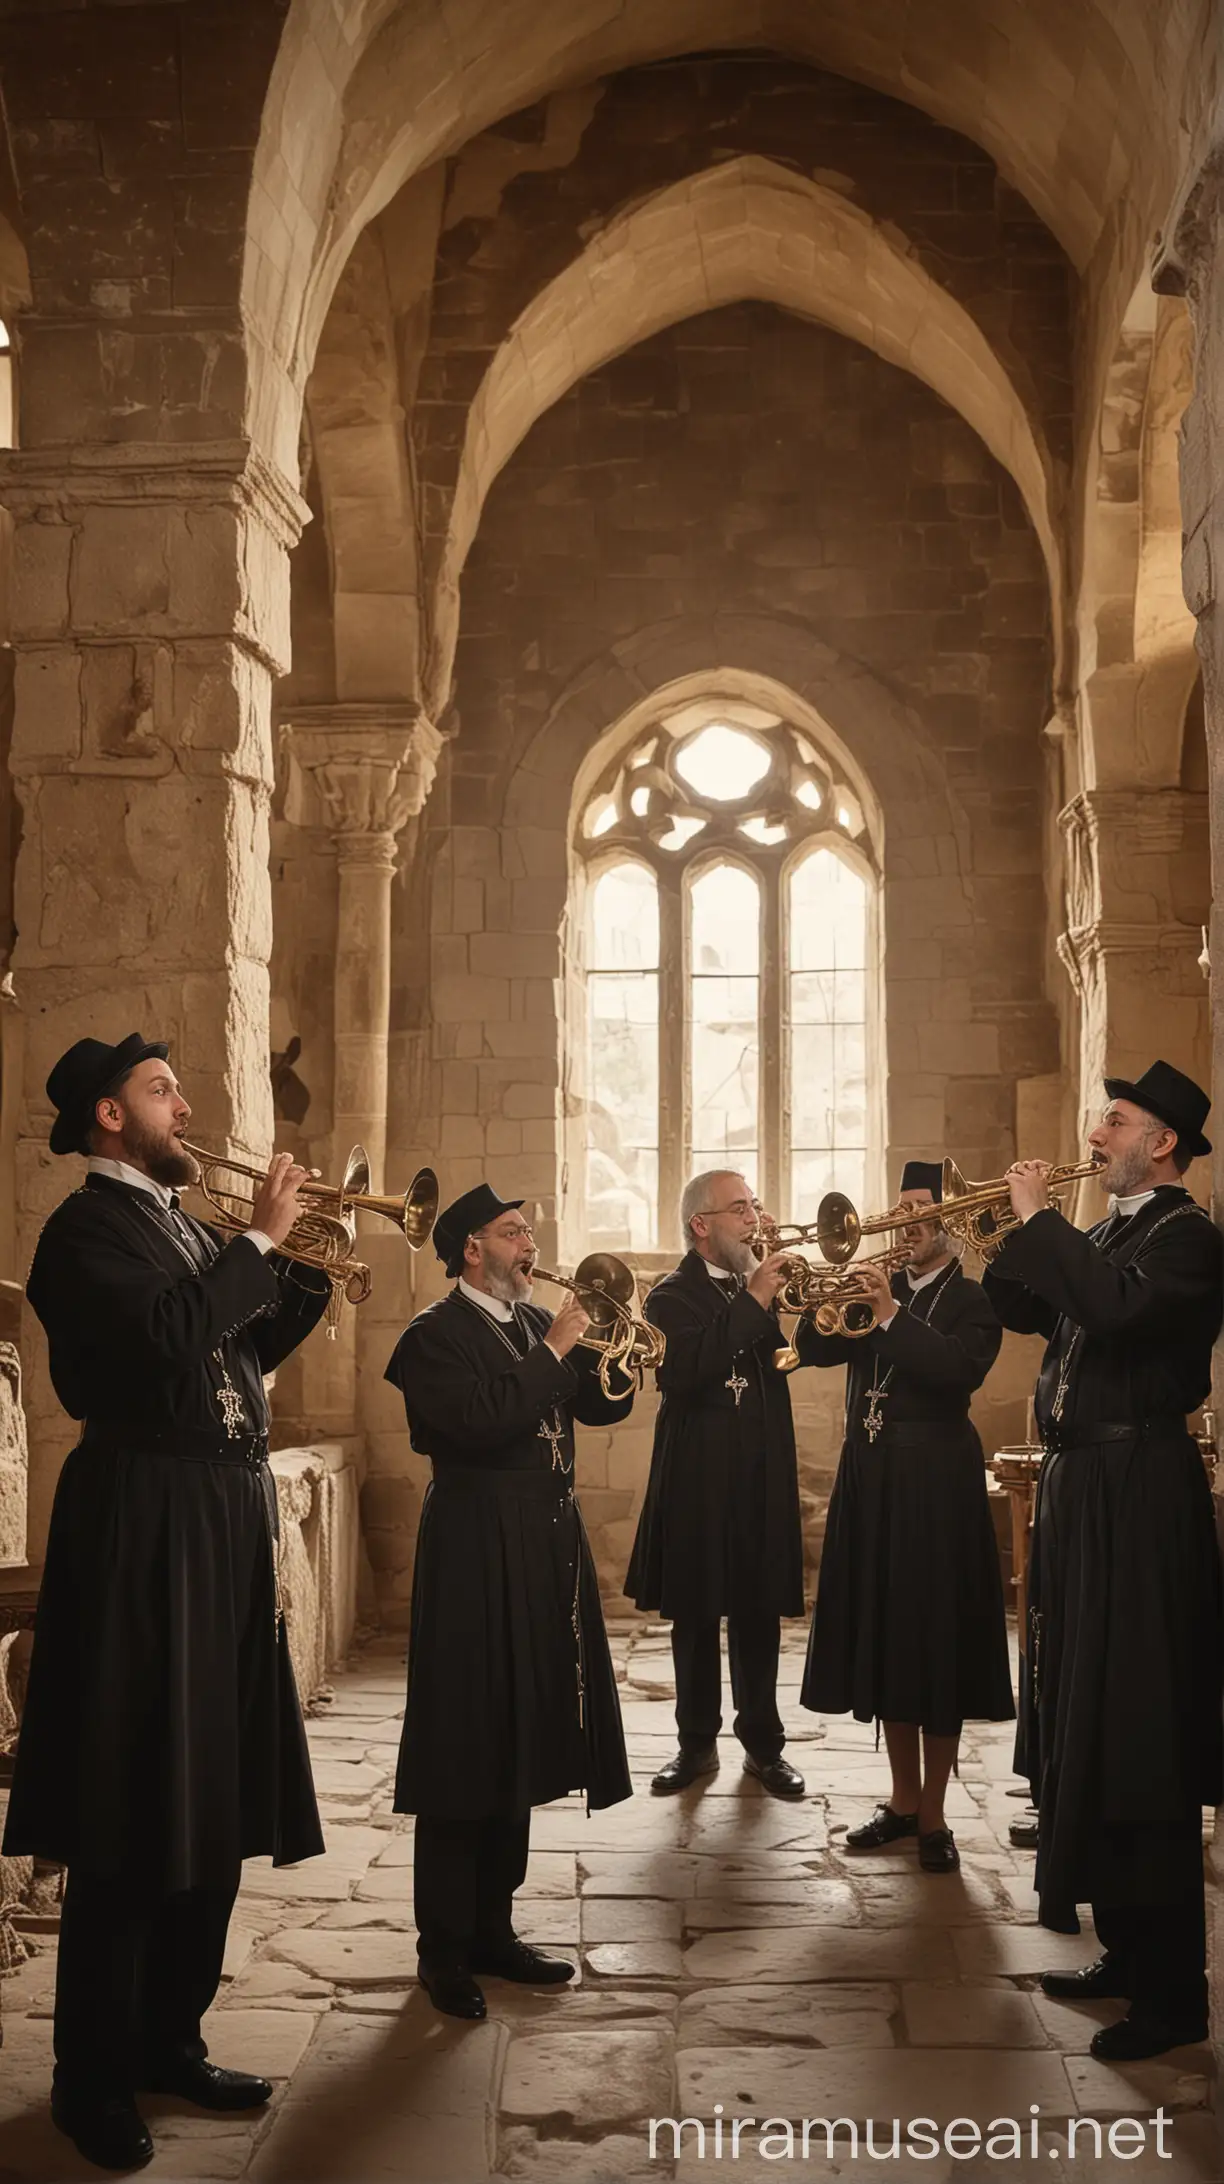 Company of Jewish priest playing trumpets and tambourine  in ancient church  in ancient world 